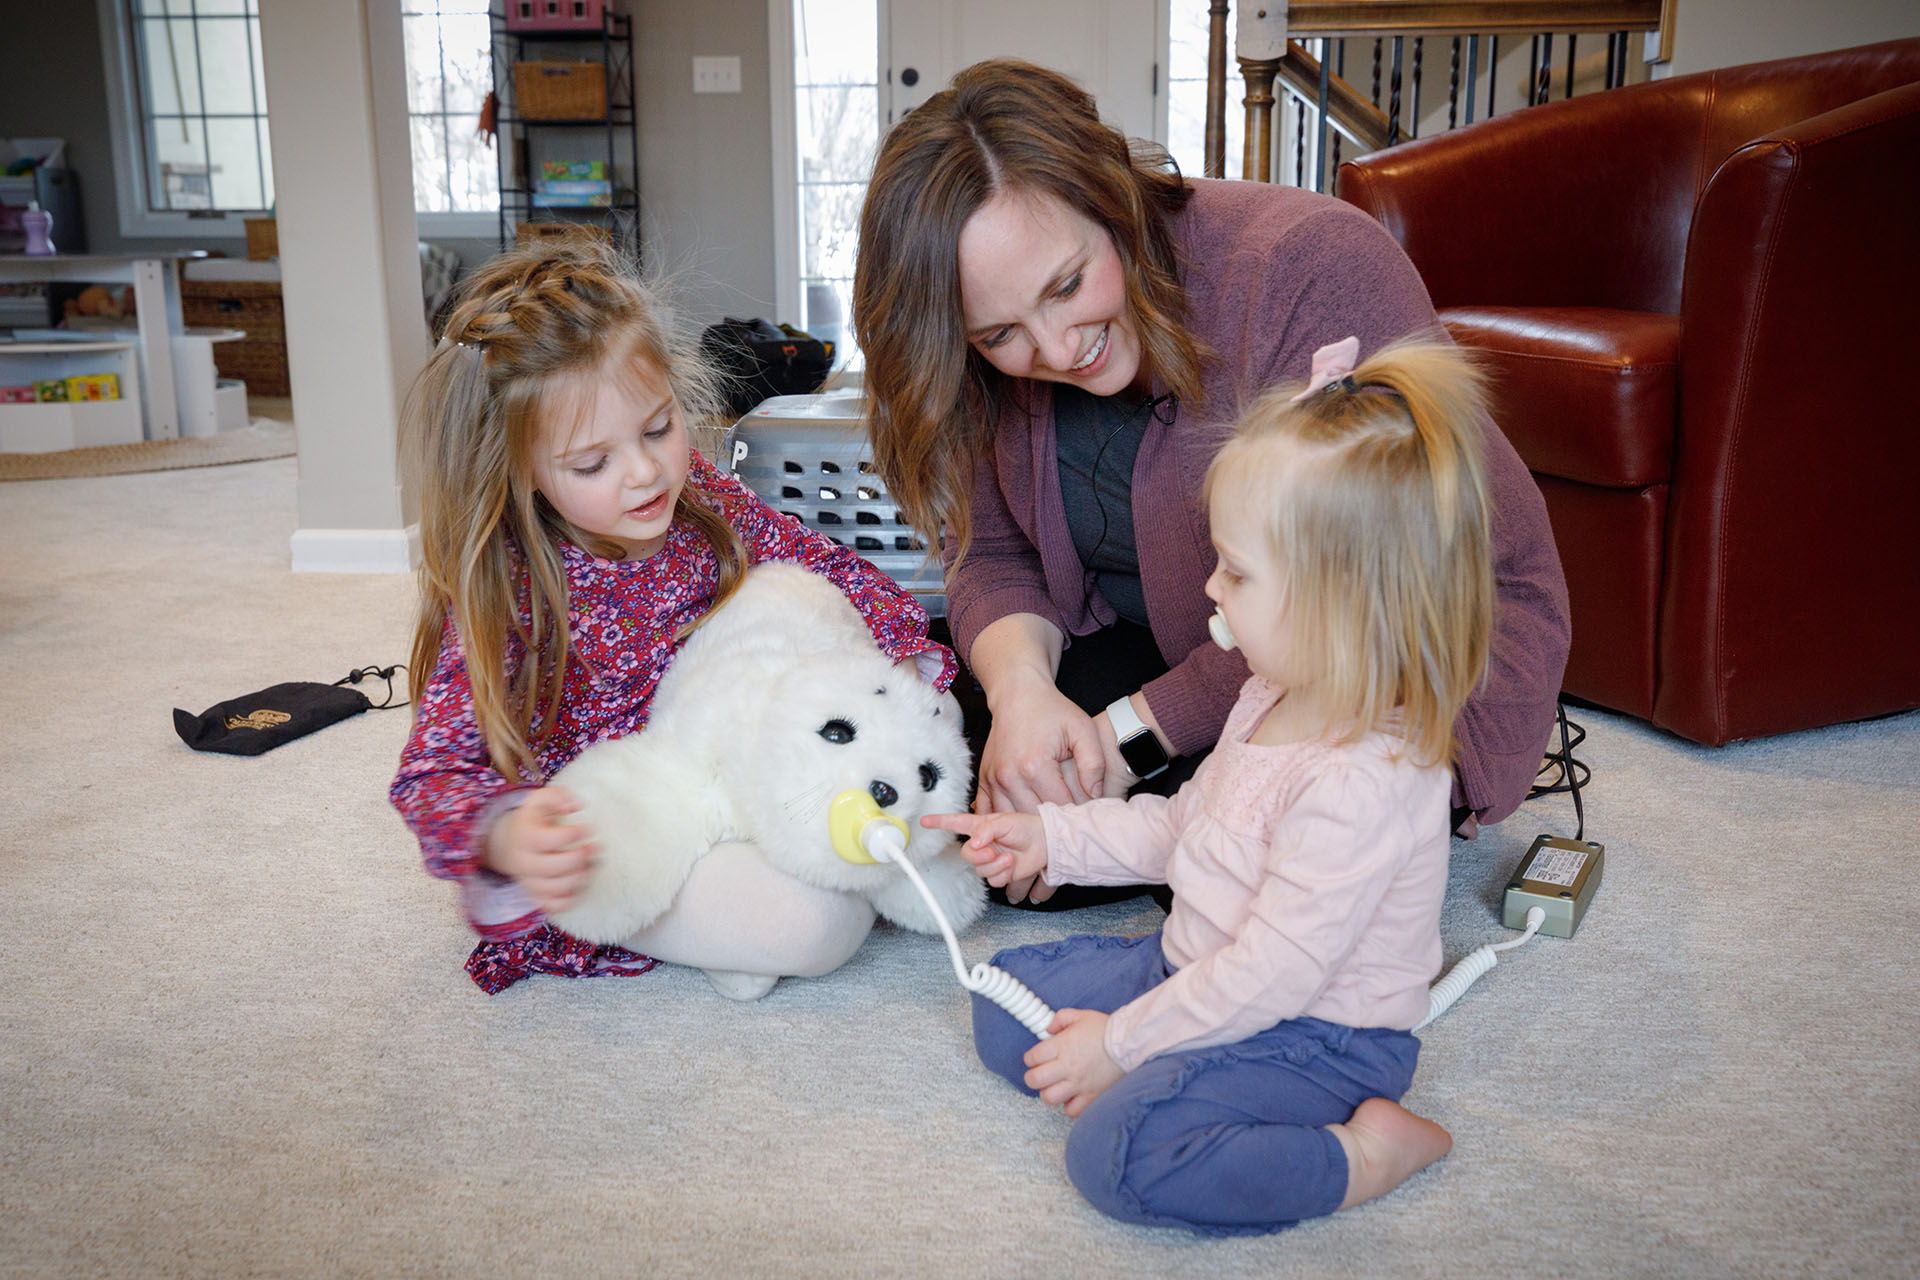 Breanna Hetland&comma; PhD&comma; and her daughters&comma; Layla&comma; 5&comma; and Tully&comma; 19 months&comma; enjoy Paro&comma; the robotic therapy seal in their home&period;